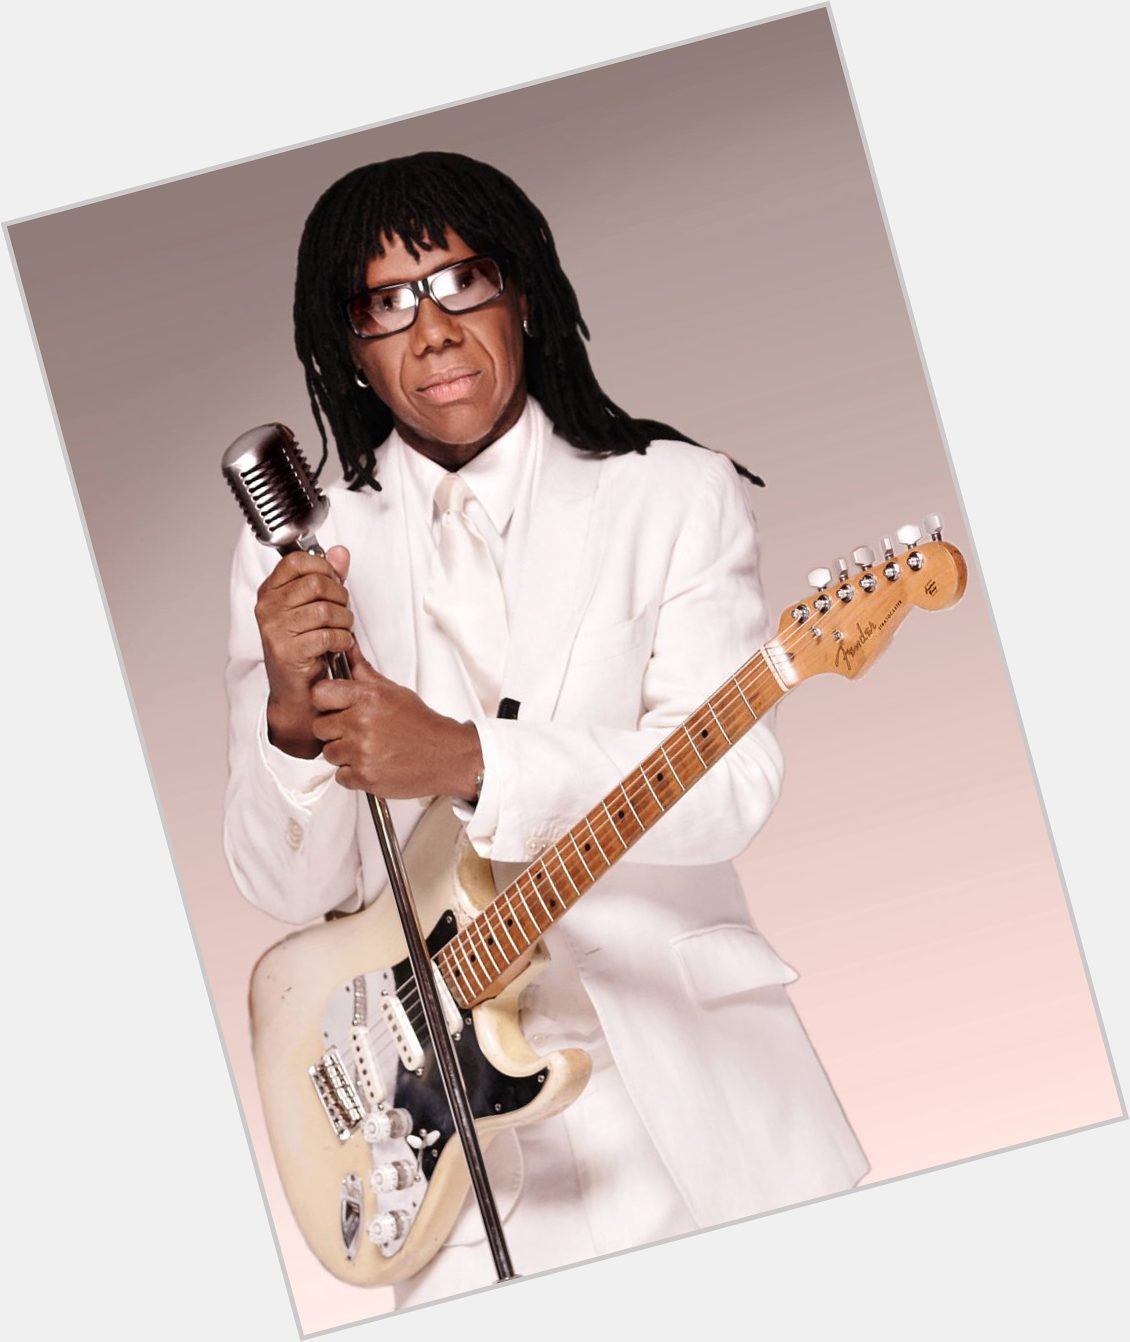 Happy 66th birthday to genius Nile Rodgers. Enjoy your day. 